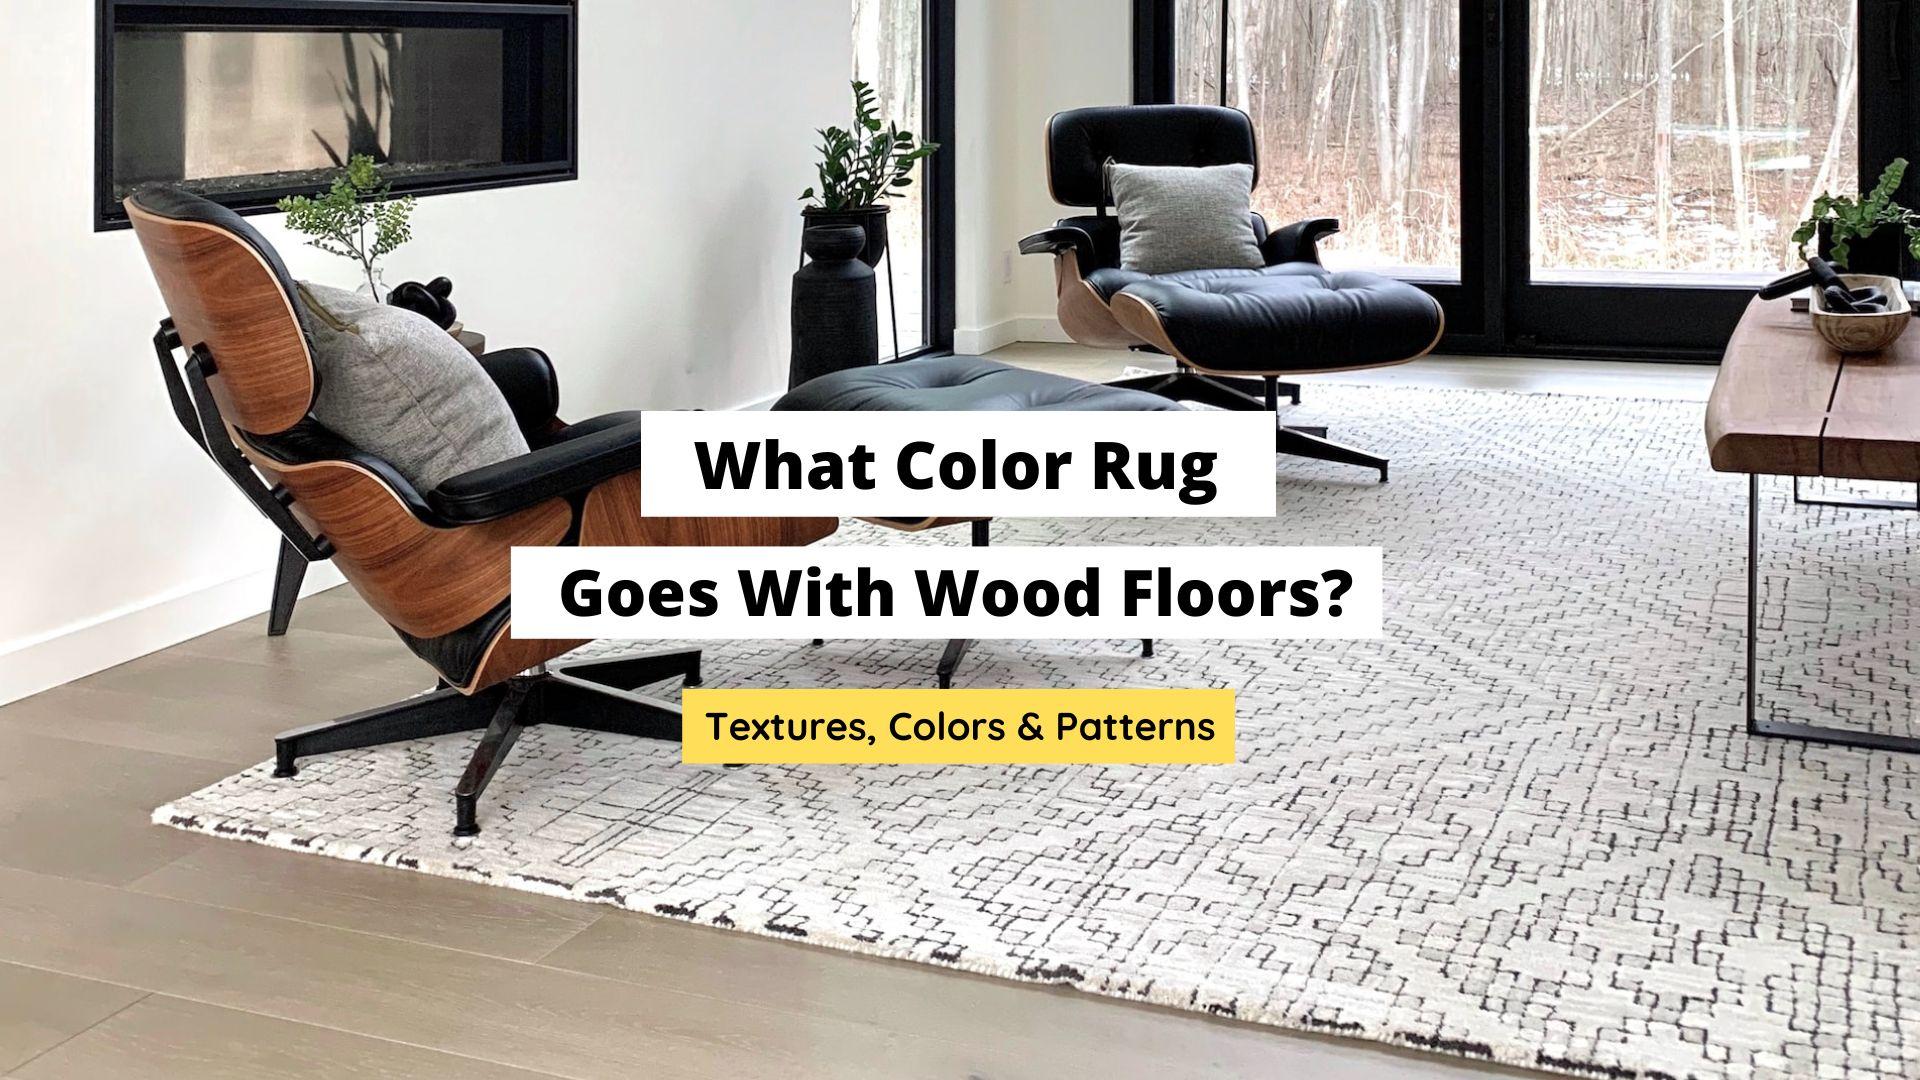 What Color Rug Goes With Wood Floors